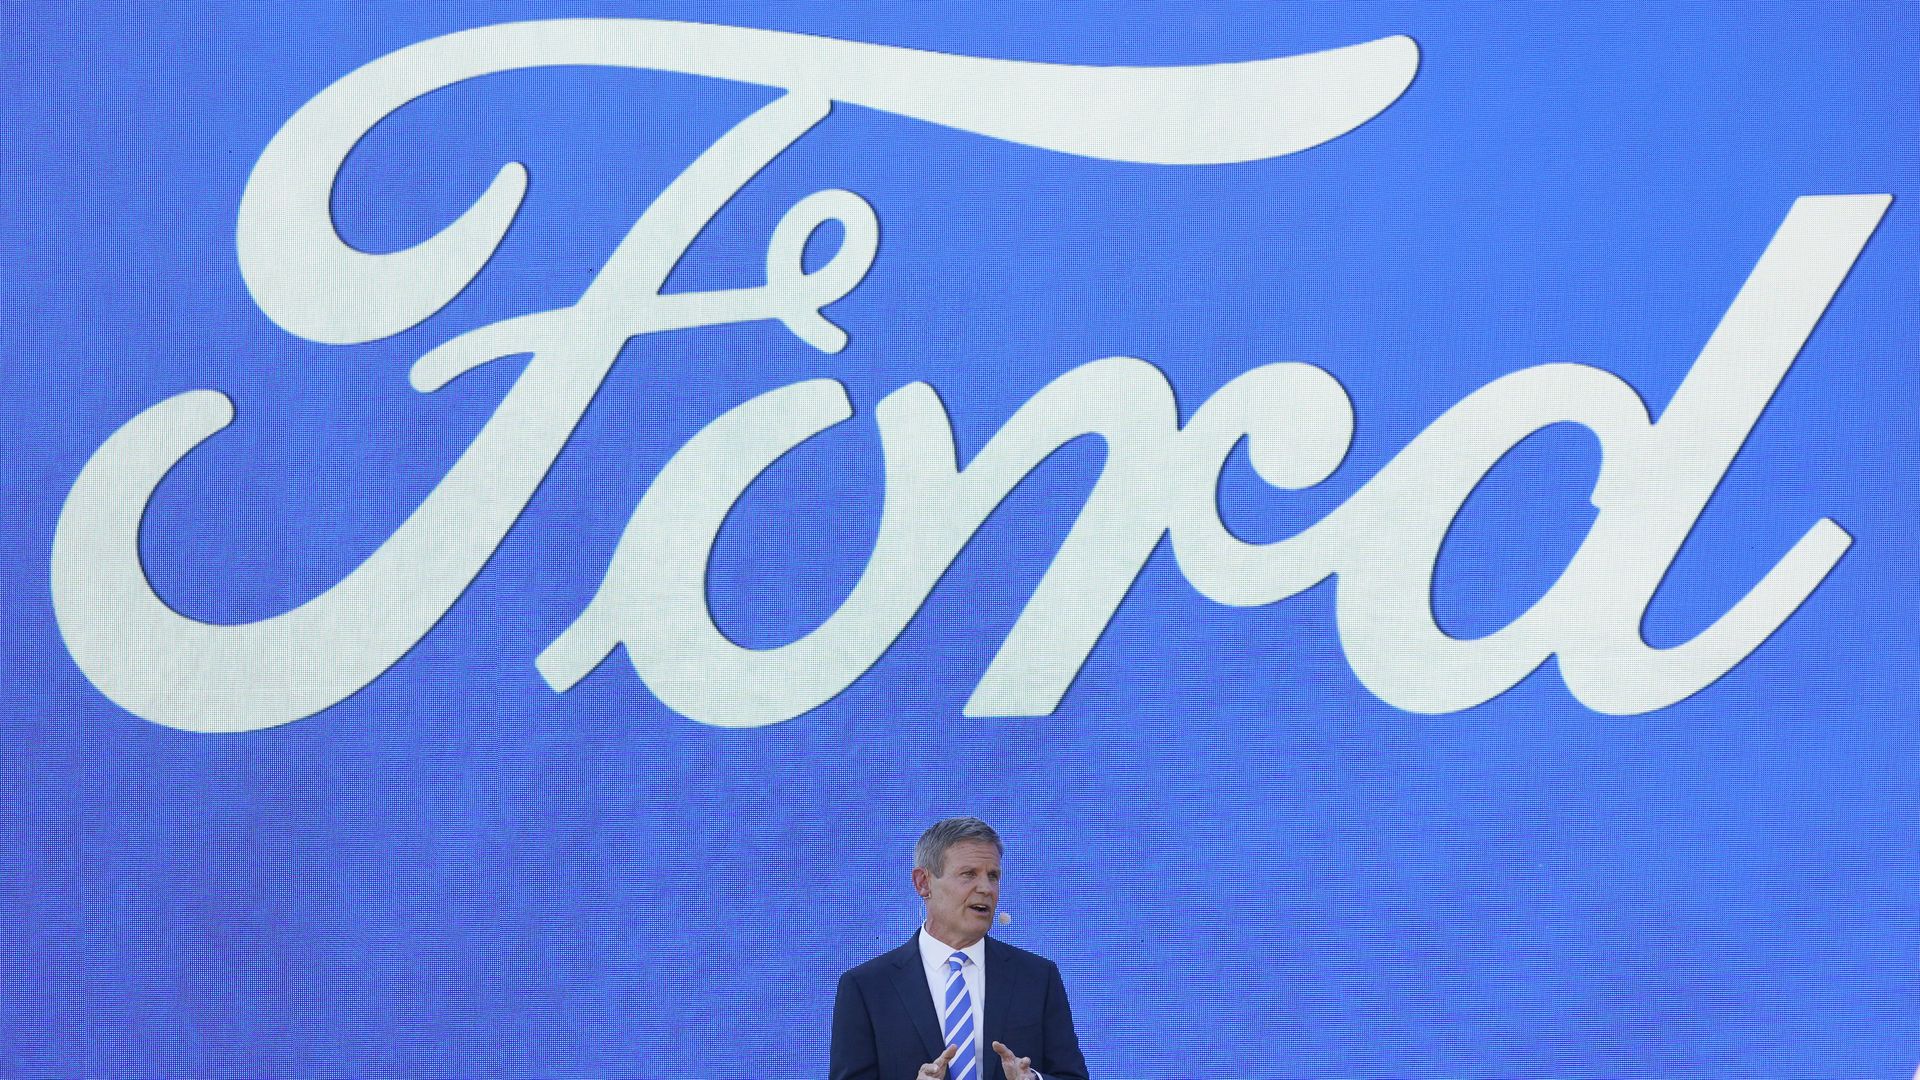 Gov. Bill Lee speaking in front of a giant blue Ford logo